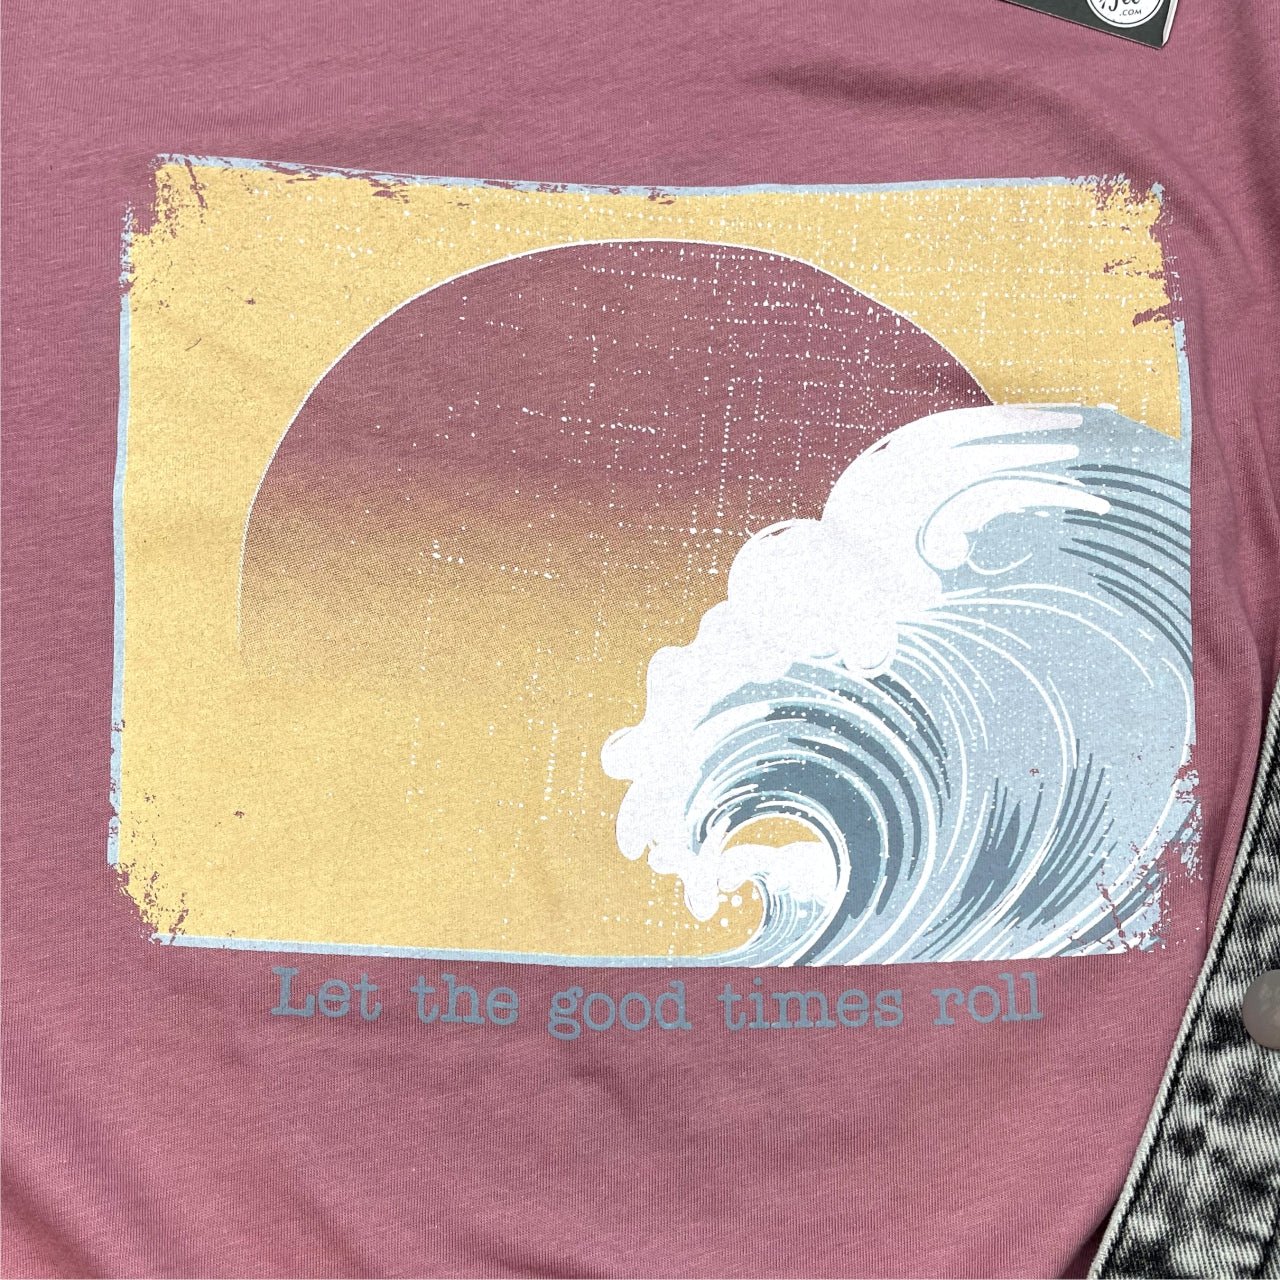 Let The Good Times Roll Tee - The Graphic Tee